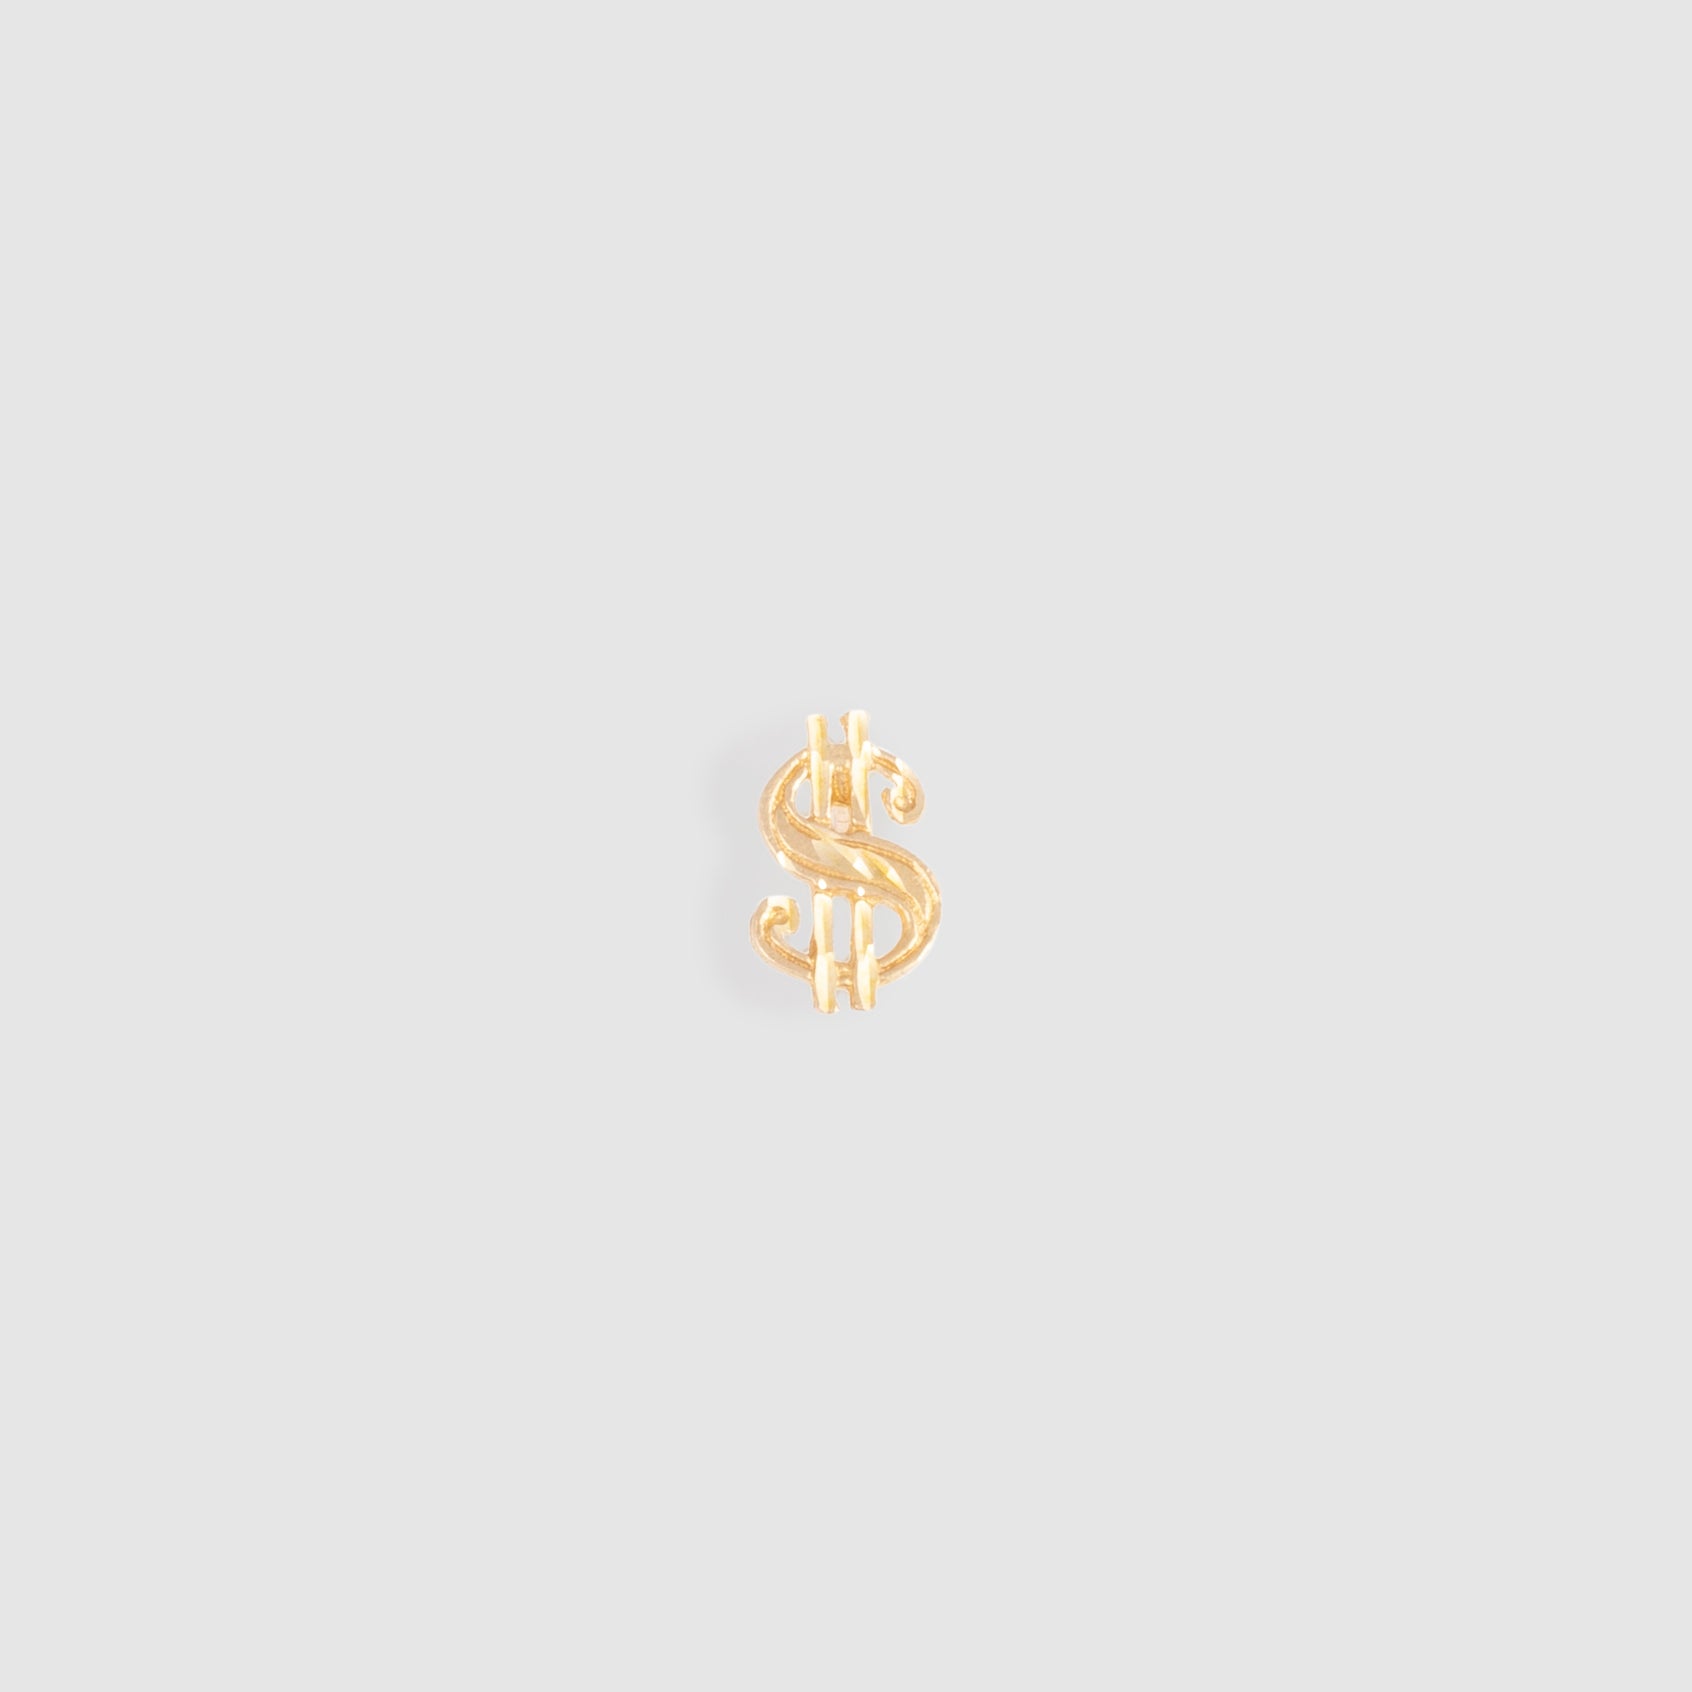 Dollar Sign Stud Earring. Made of 10k Yellow Gold. Stud measures 11mm x 7mm x 1mm 